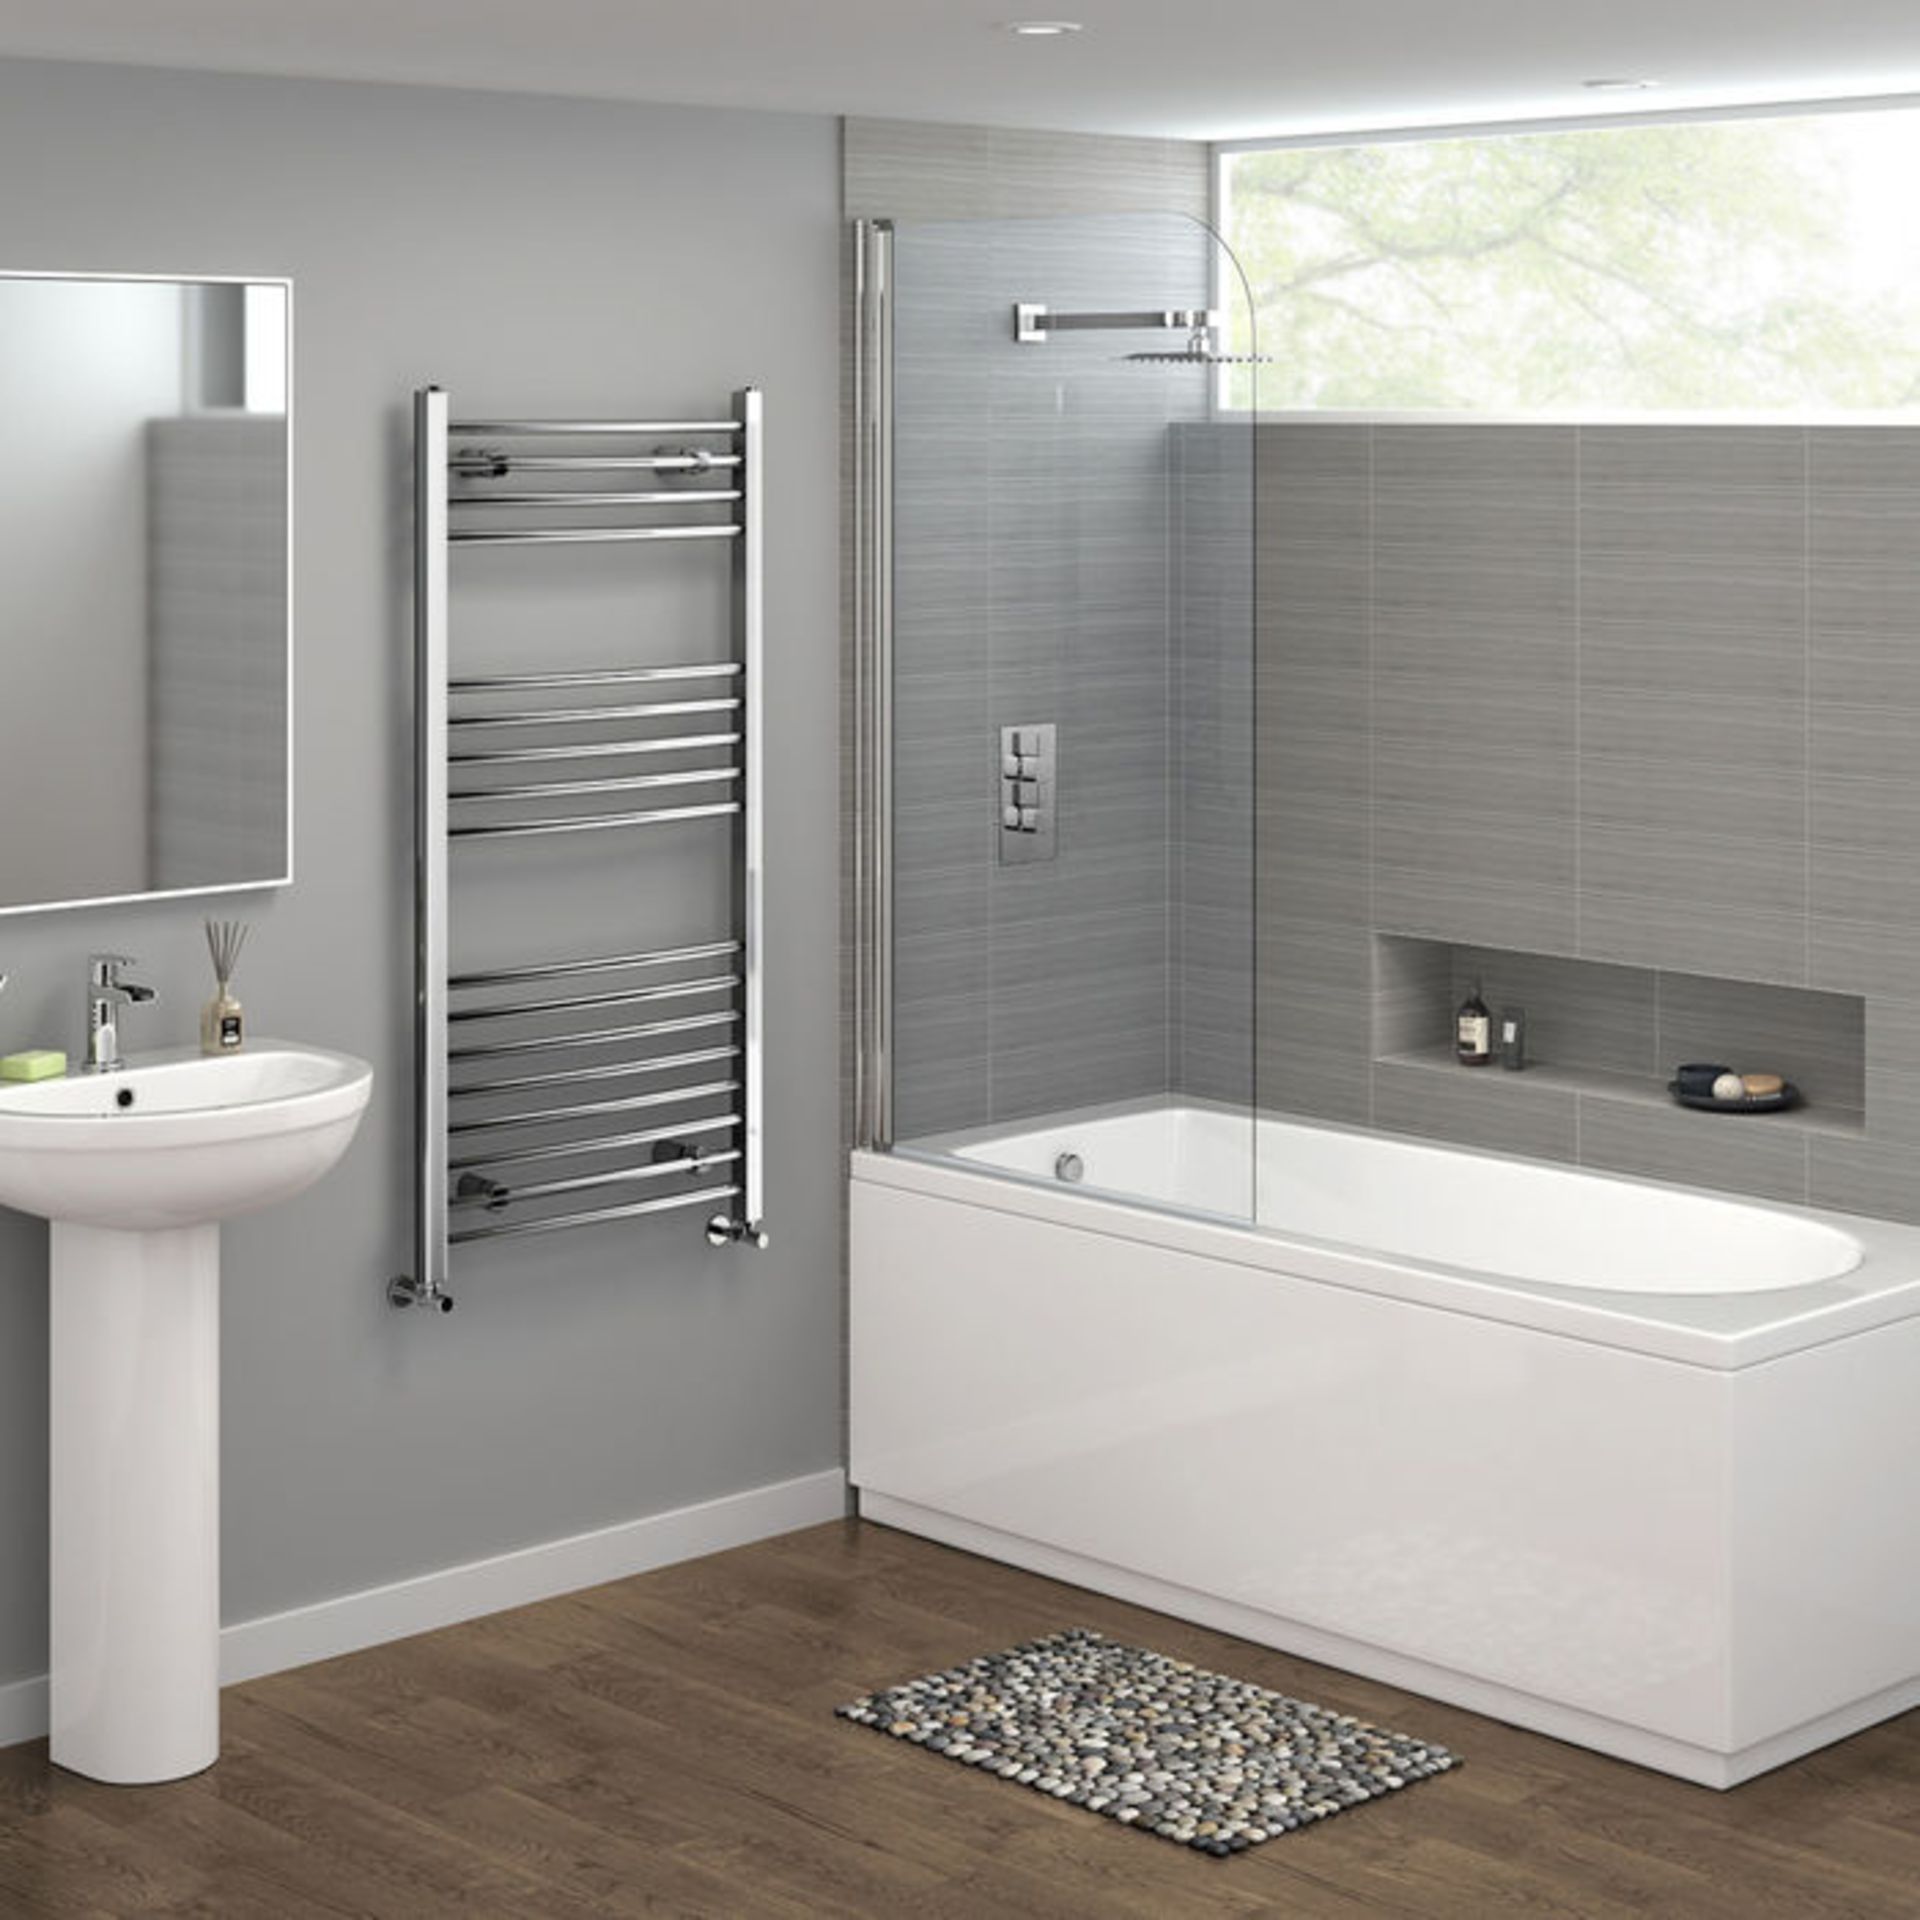 1200x600mm - 20mm Tubes - Chrome Curved Rail Ladder Towel Radiator. NC1200600. Made from chrome... - Image 2 of 3